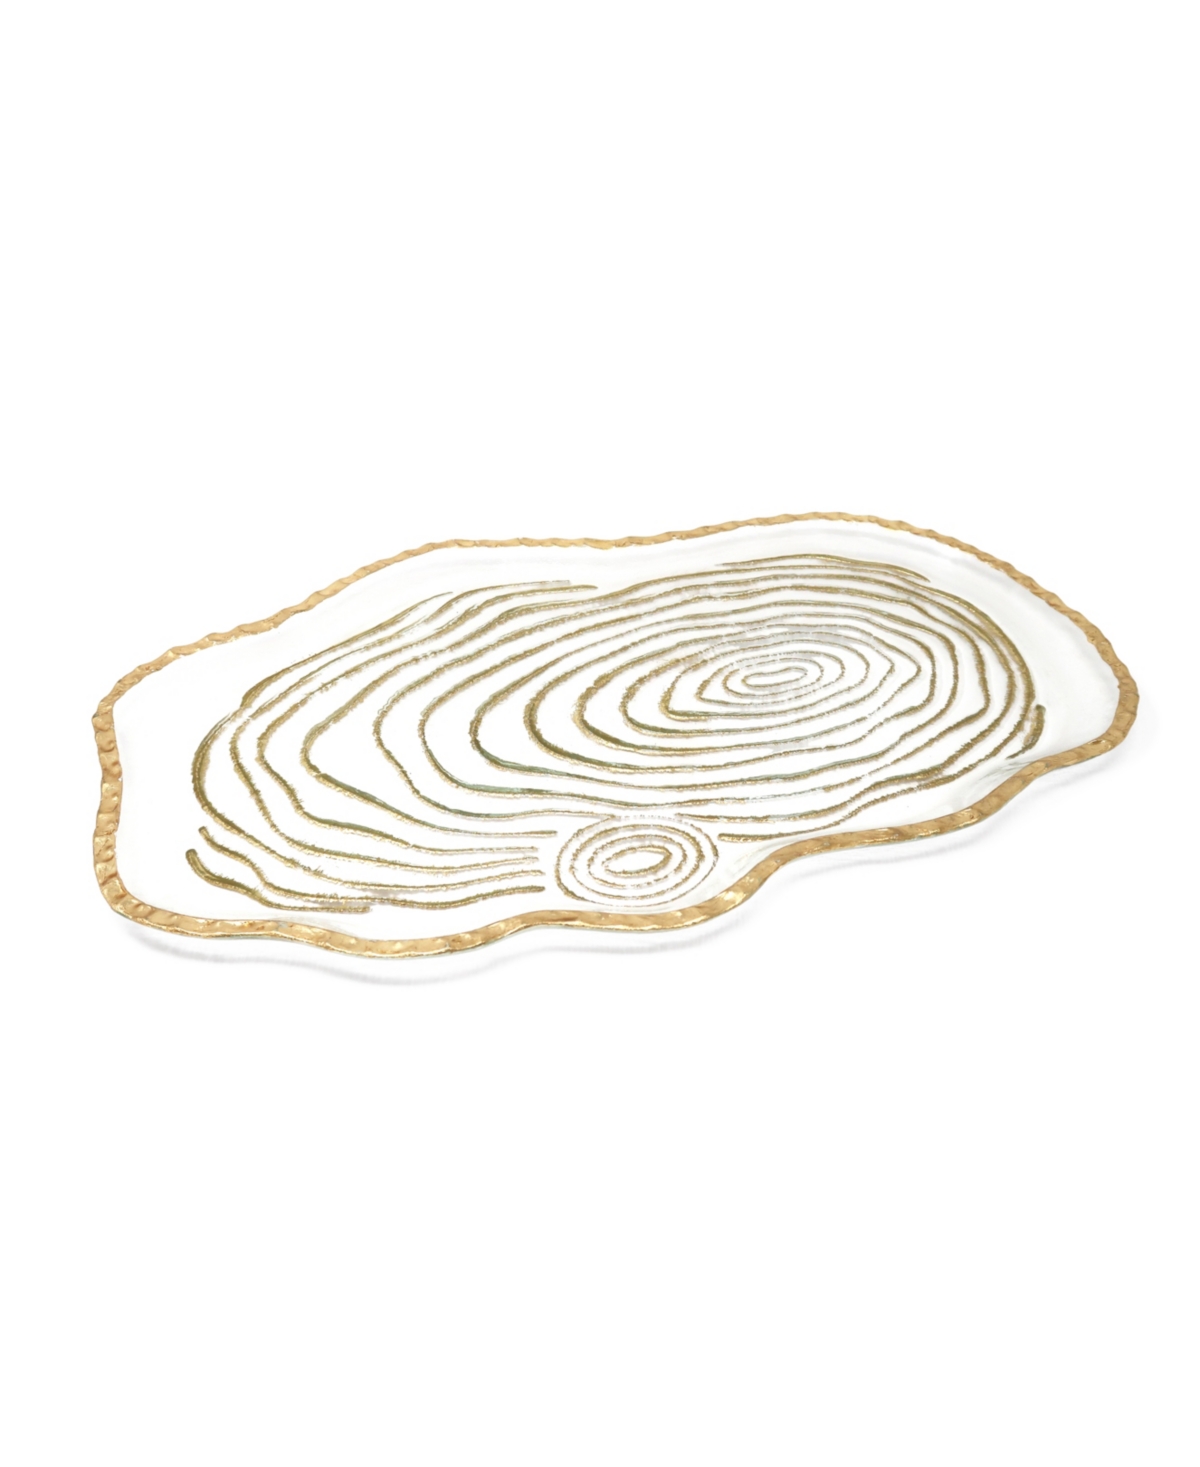 Glass Oval Tray Gold-Tone Grained - Gold